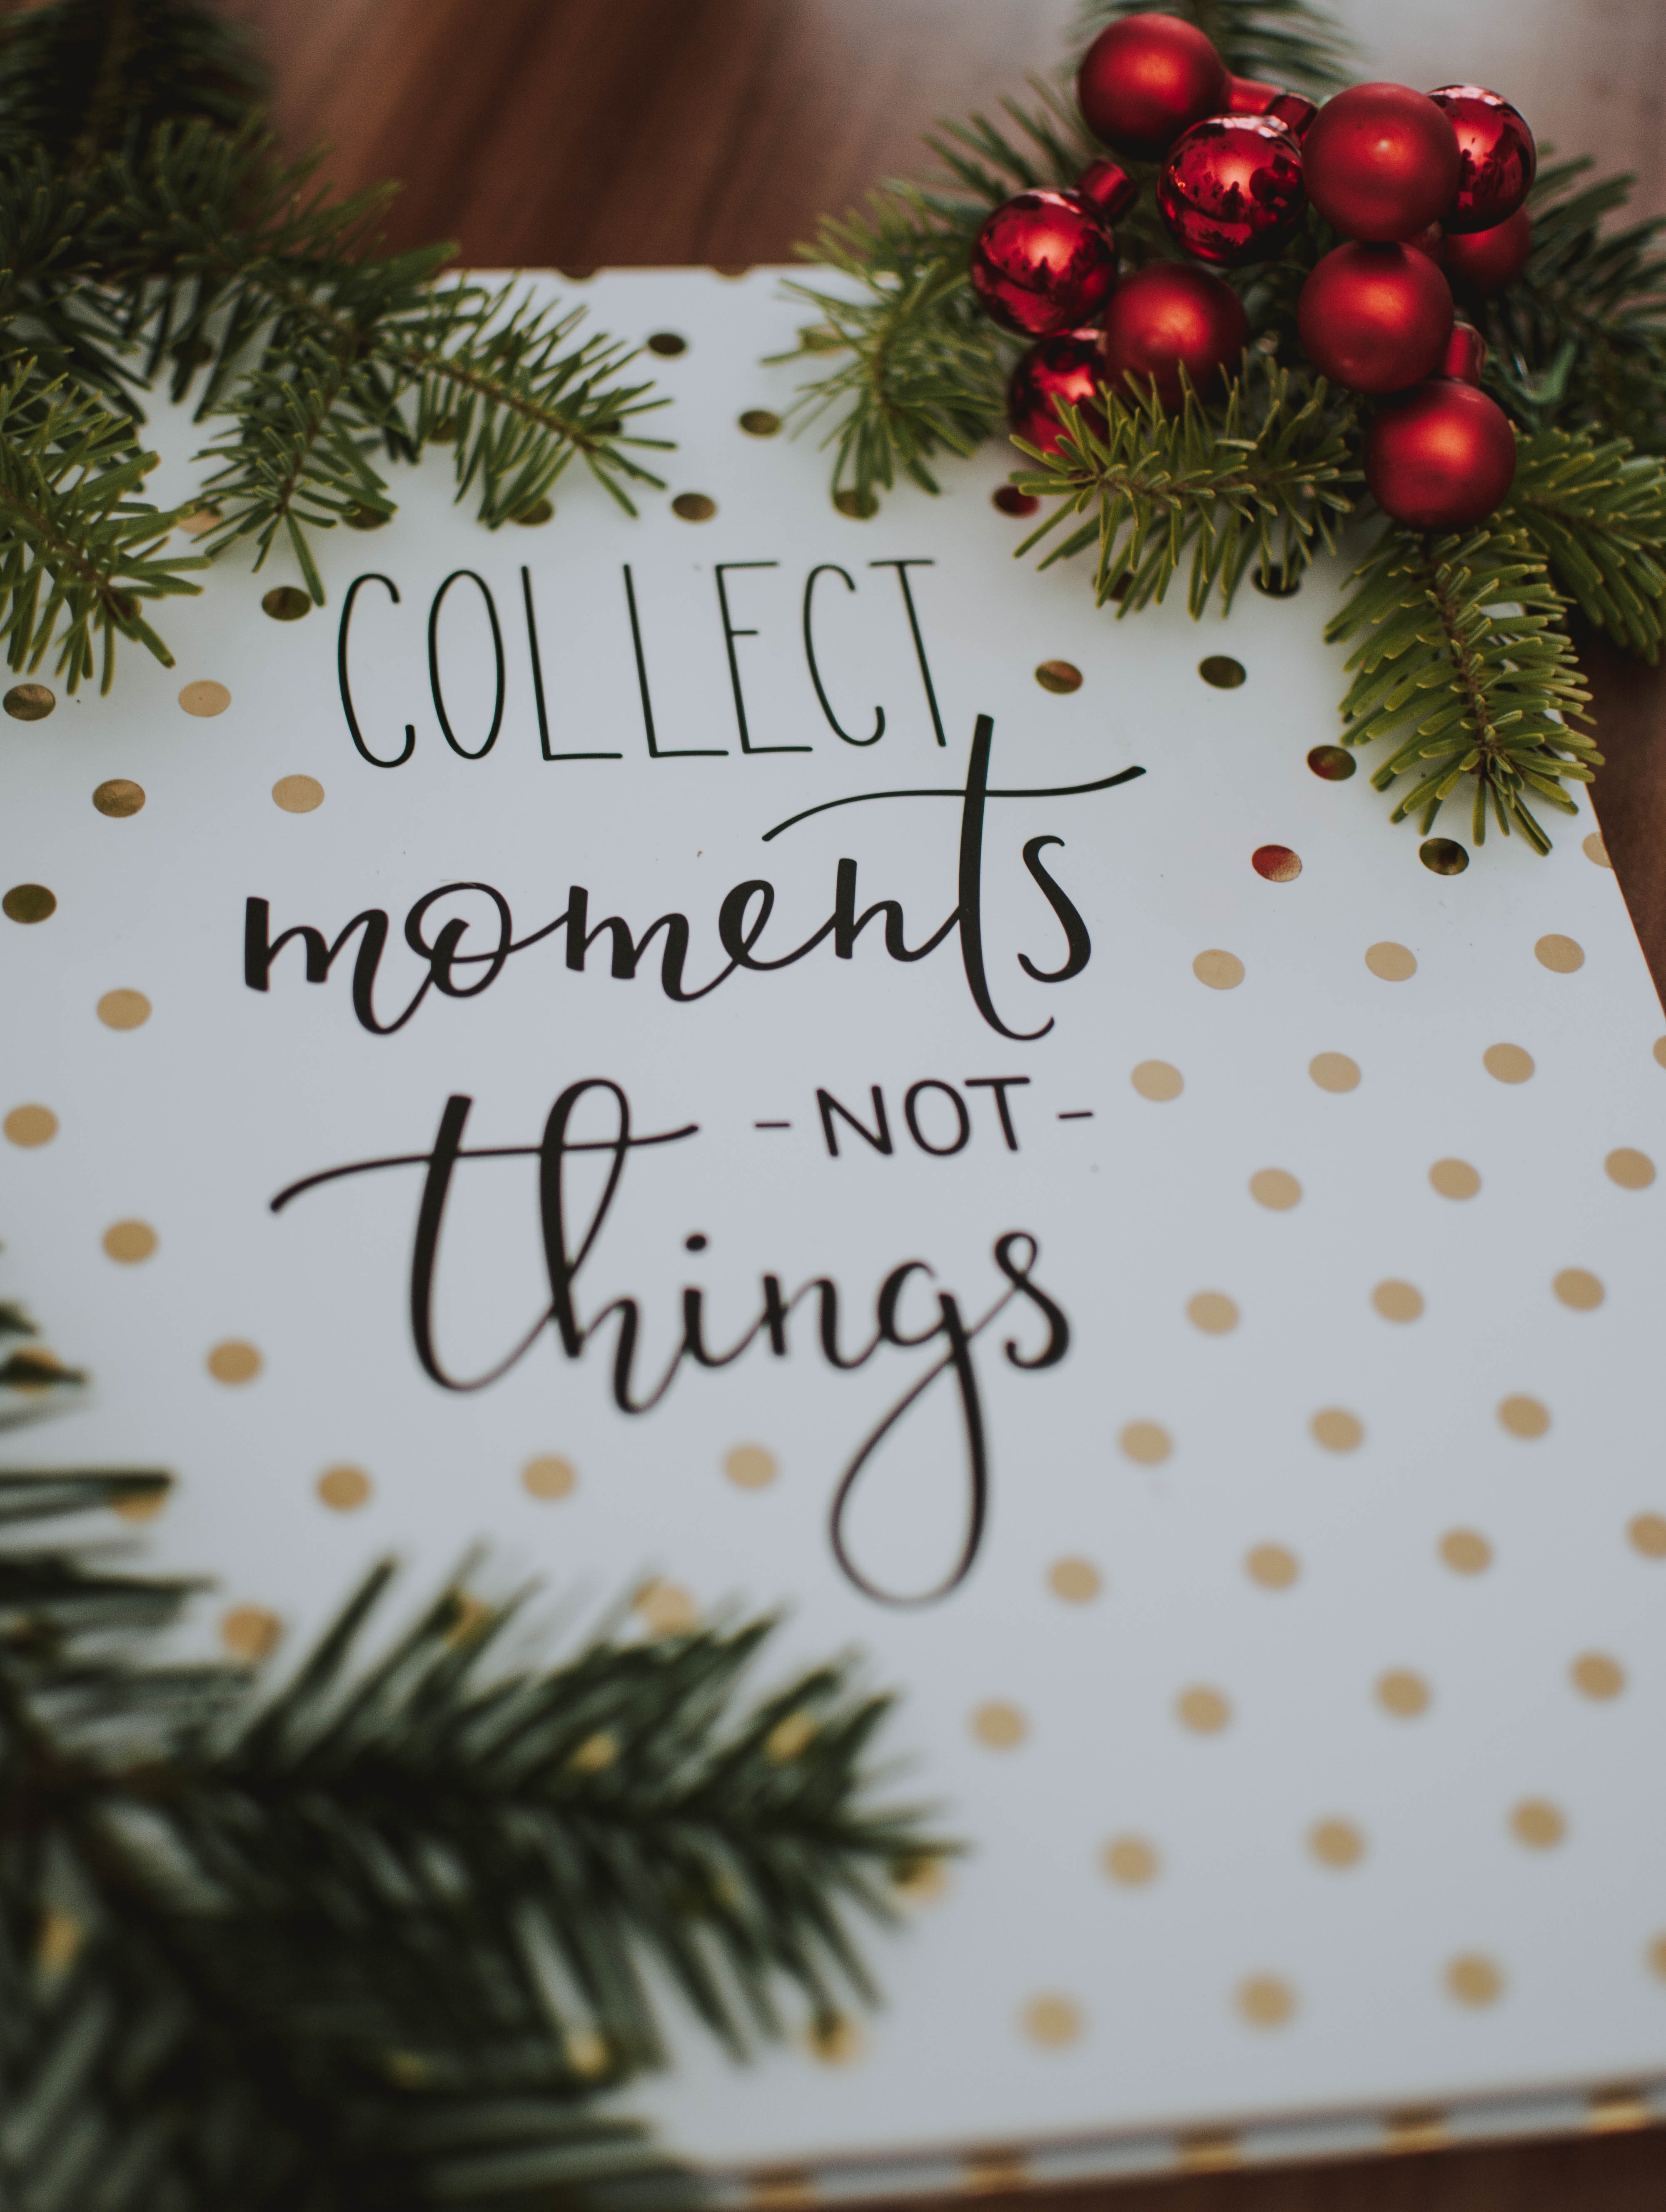 "Collect moments, not things" card | Photo: Pexels.com